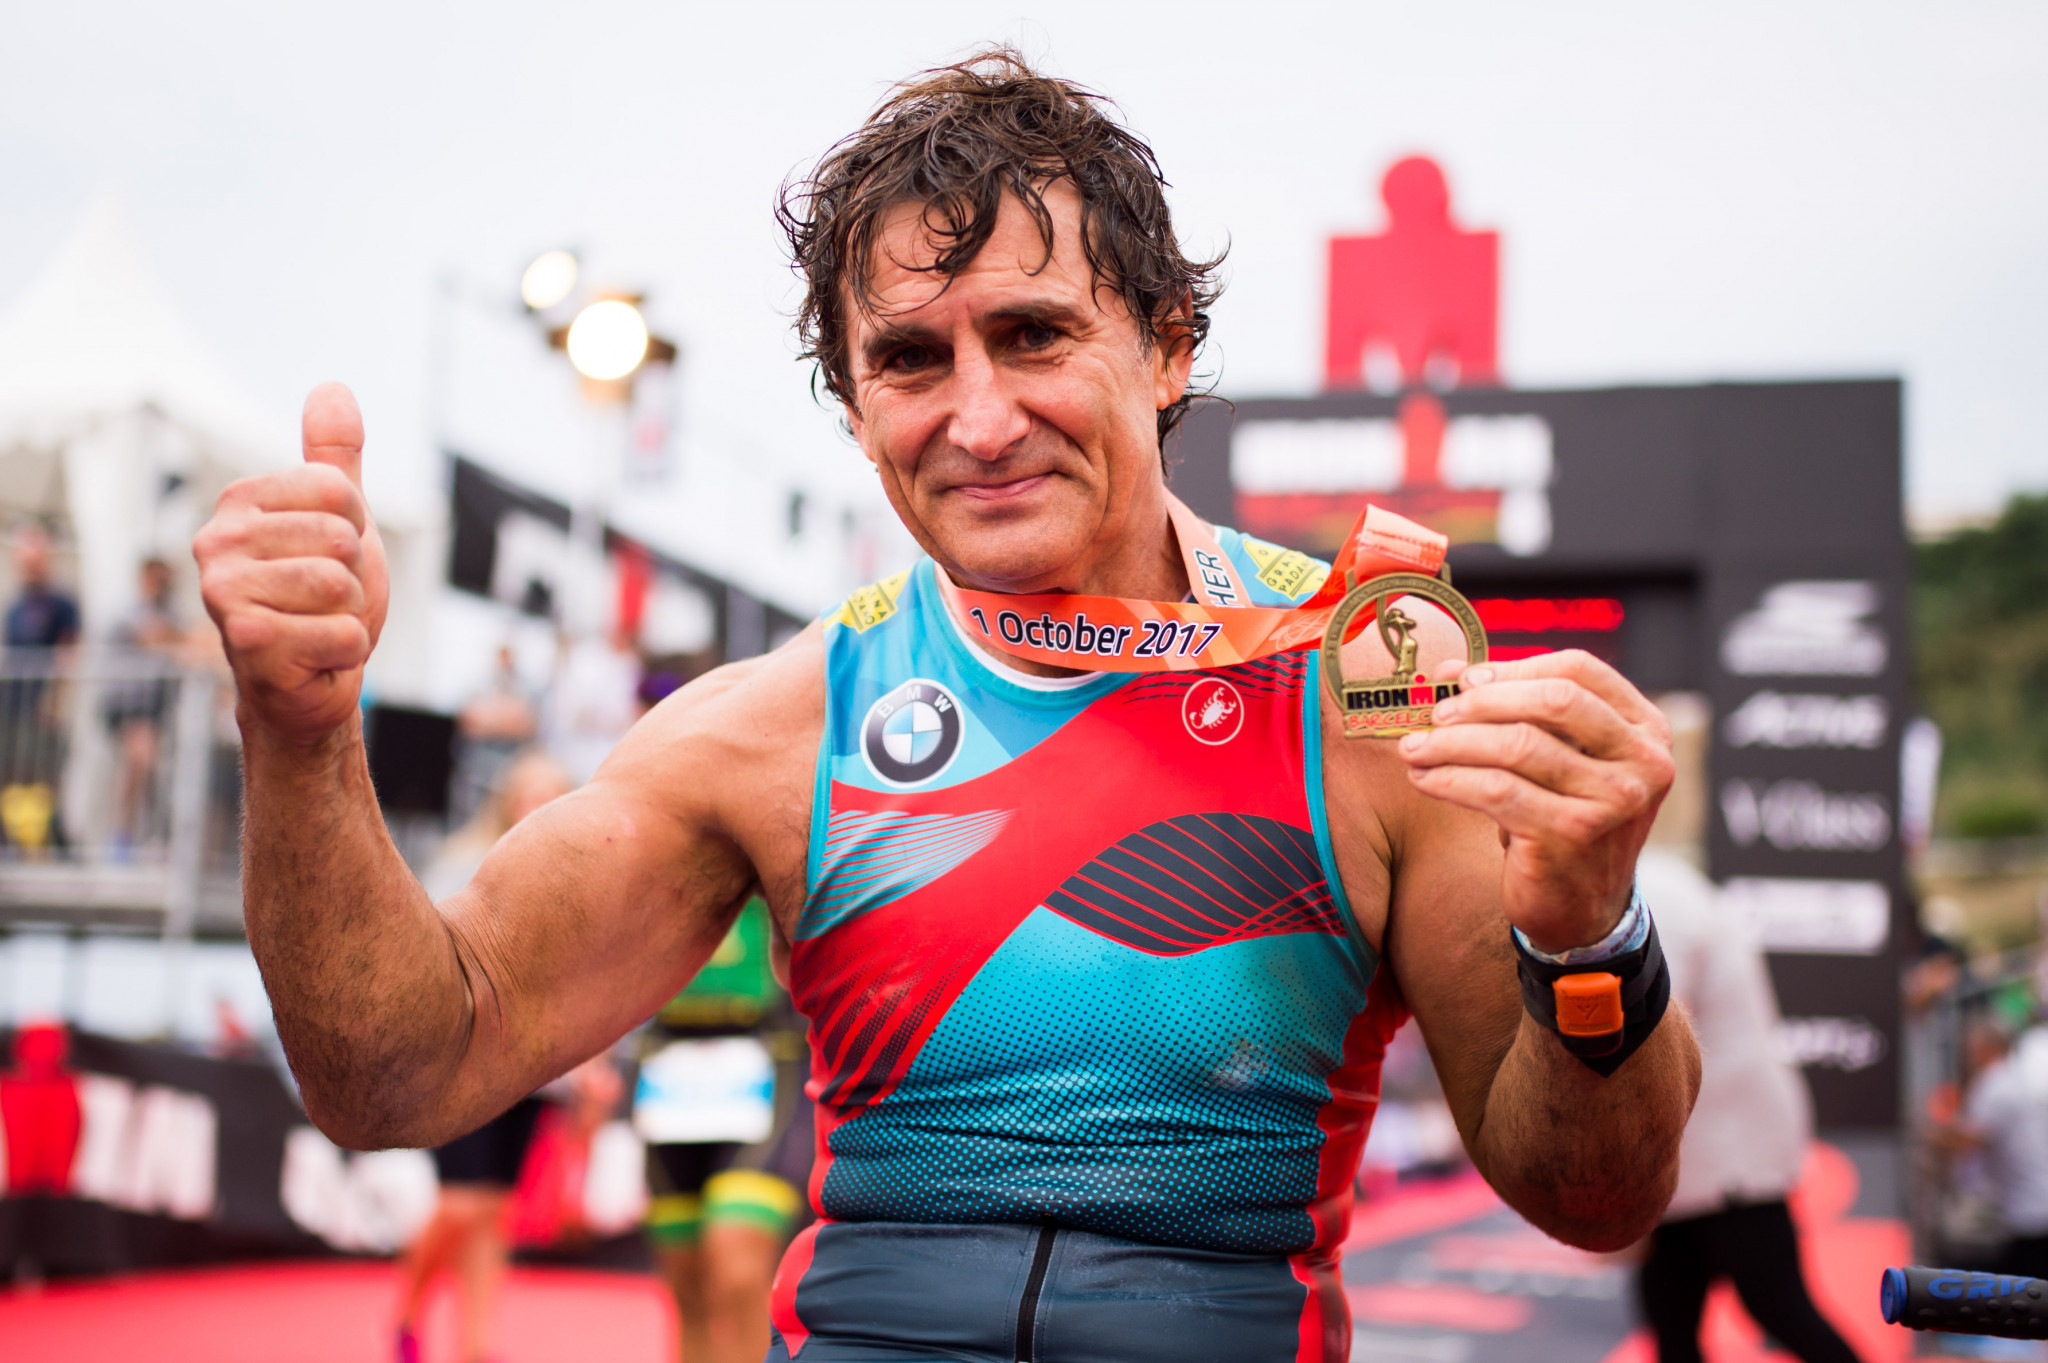 Paralympic champion Zanardi has brain surgery for second time after crash